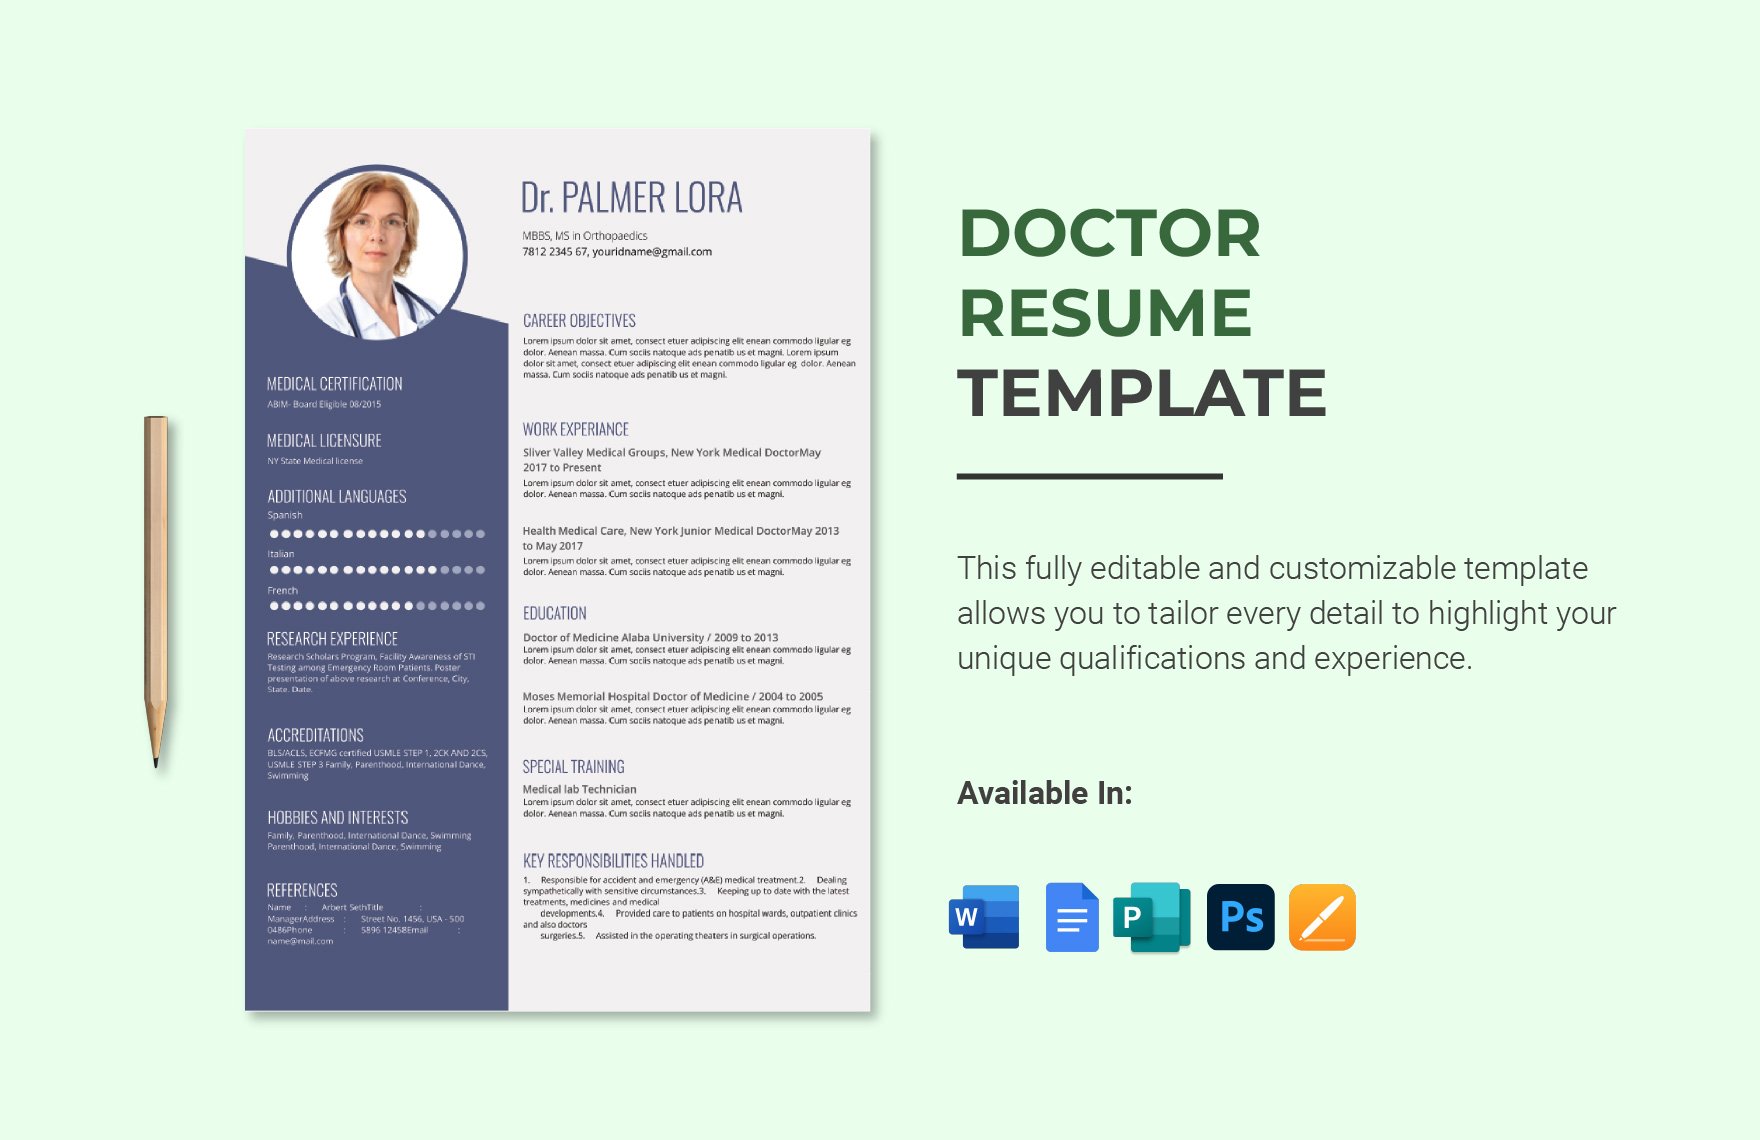 Doctor Resume in Word, Google Docs, PSD, Apple Pages, Publisher